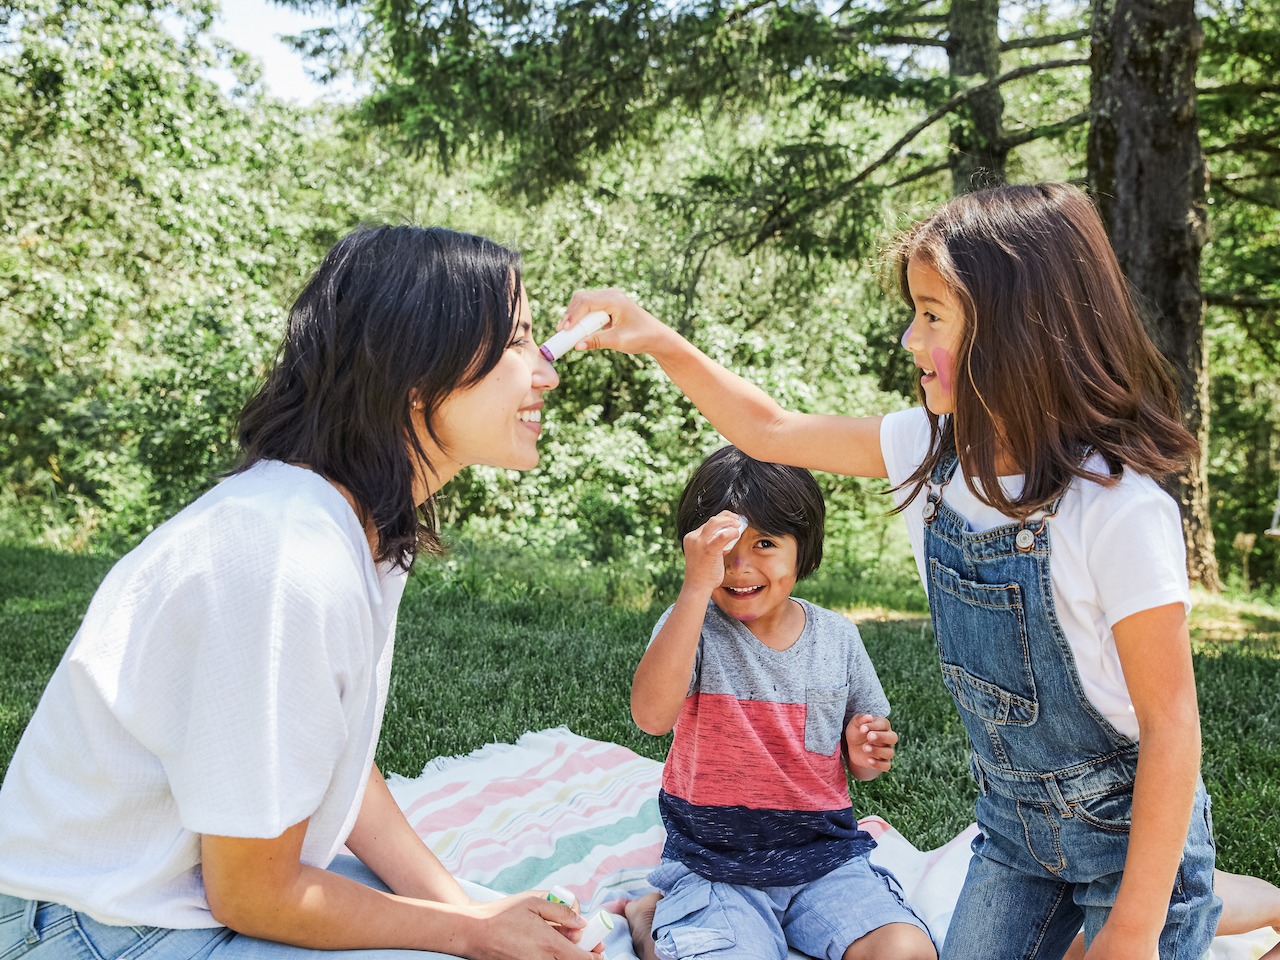 Young girl applying sunscreen to a woman outside while a younger boy applies sunscreen on his forehead sitting on a picnic blanket 